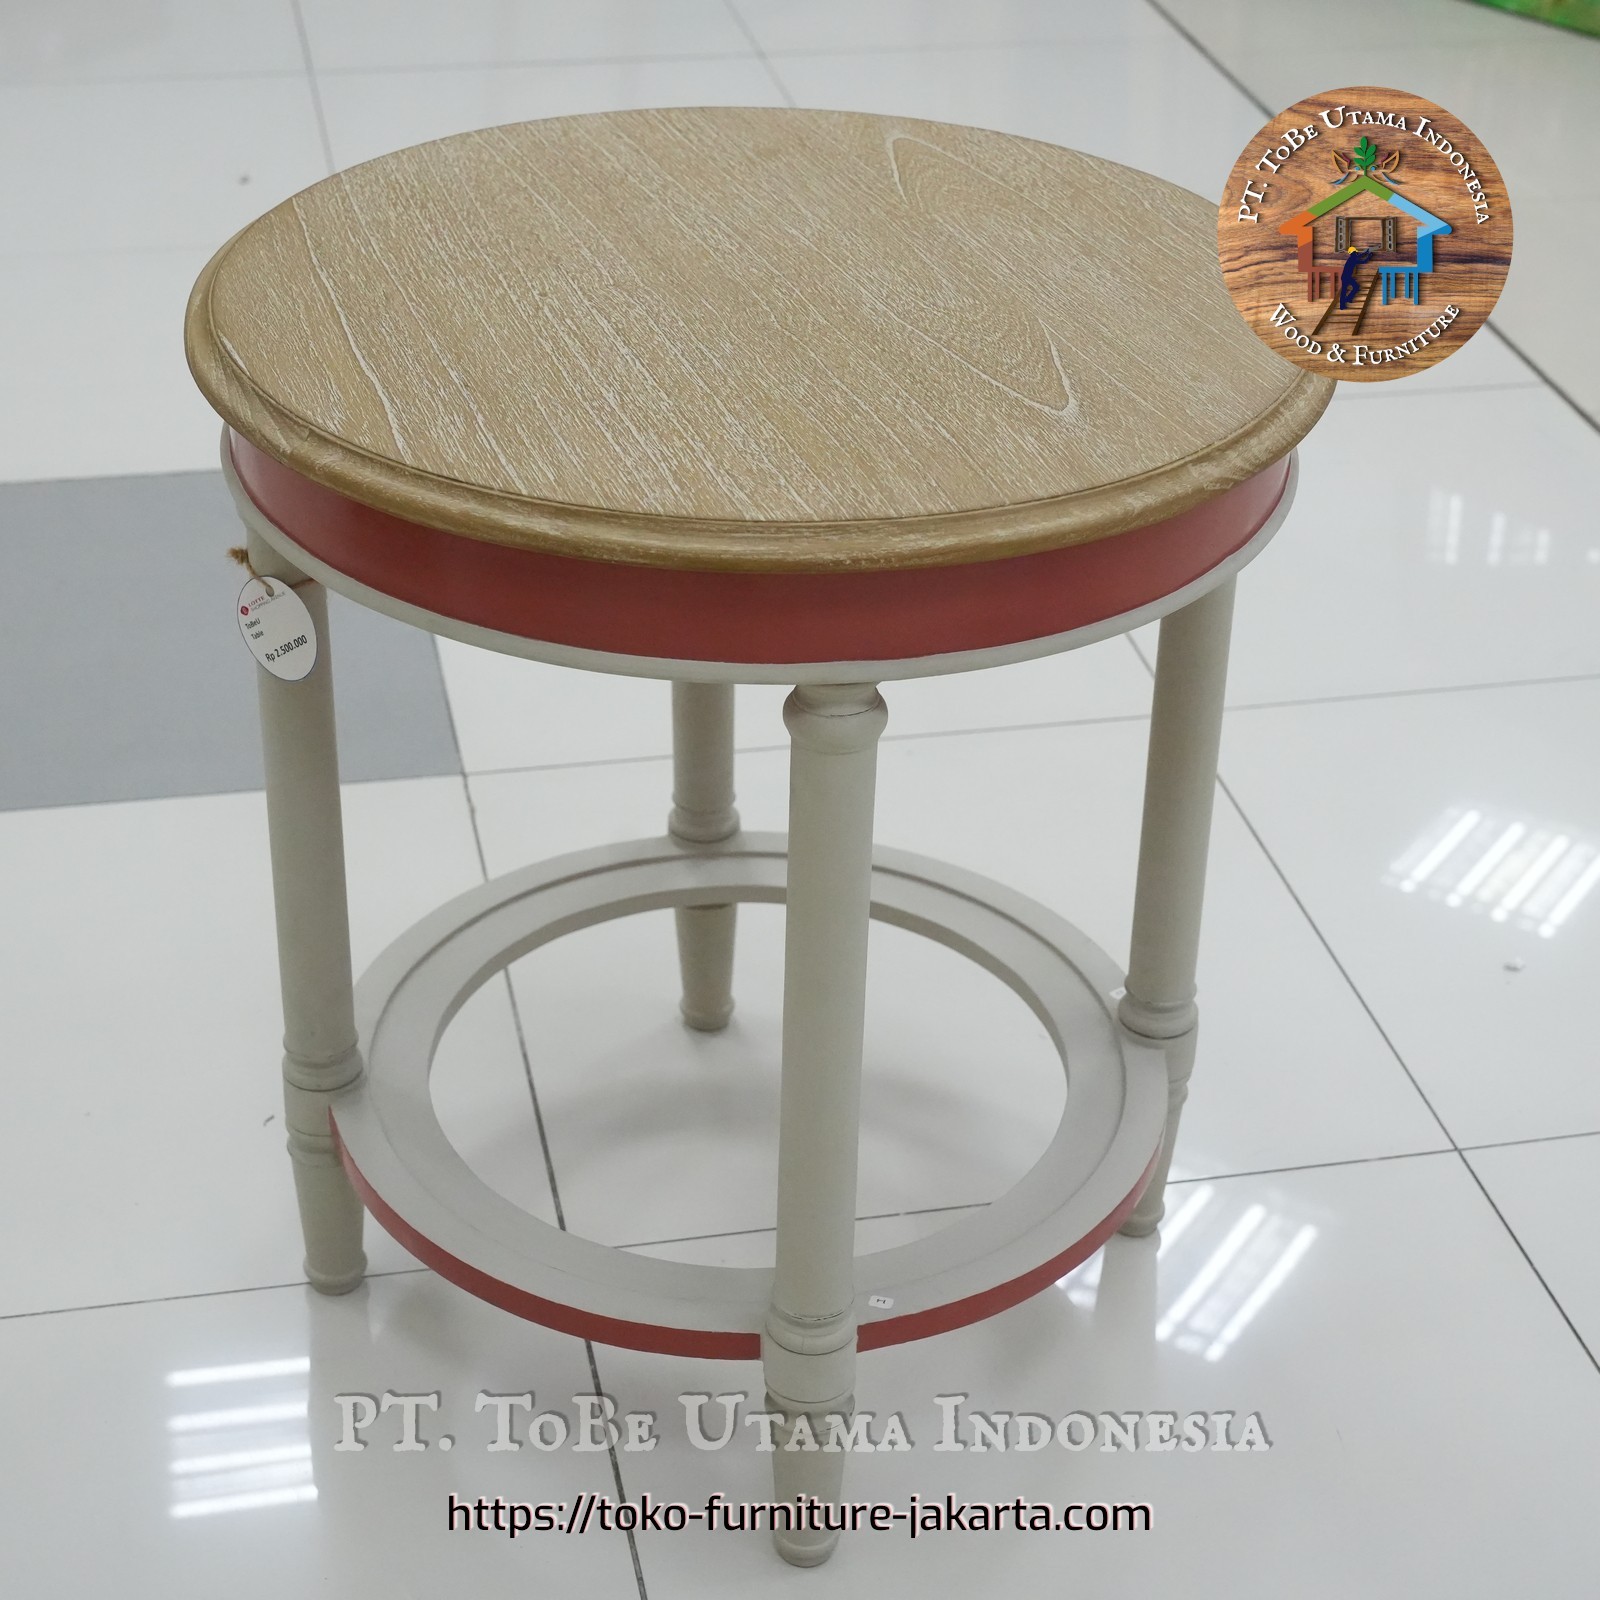 Living Room - Coffee Tables: Round Coffee Table with Glass made of mahogany wood, glass (image 1 of 15).